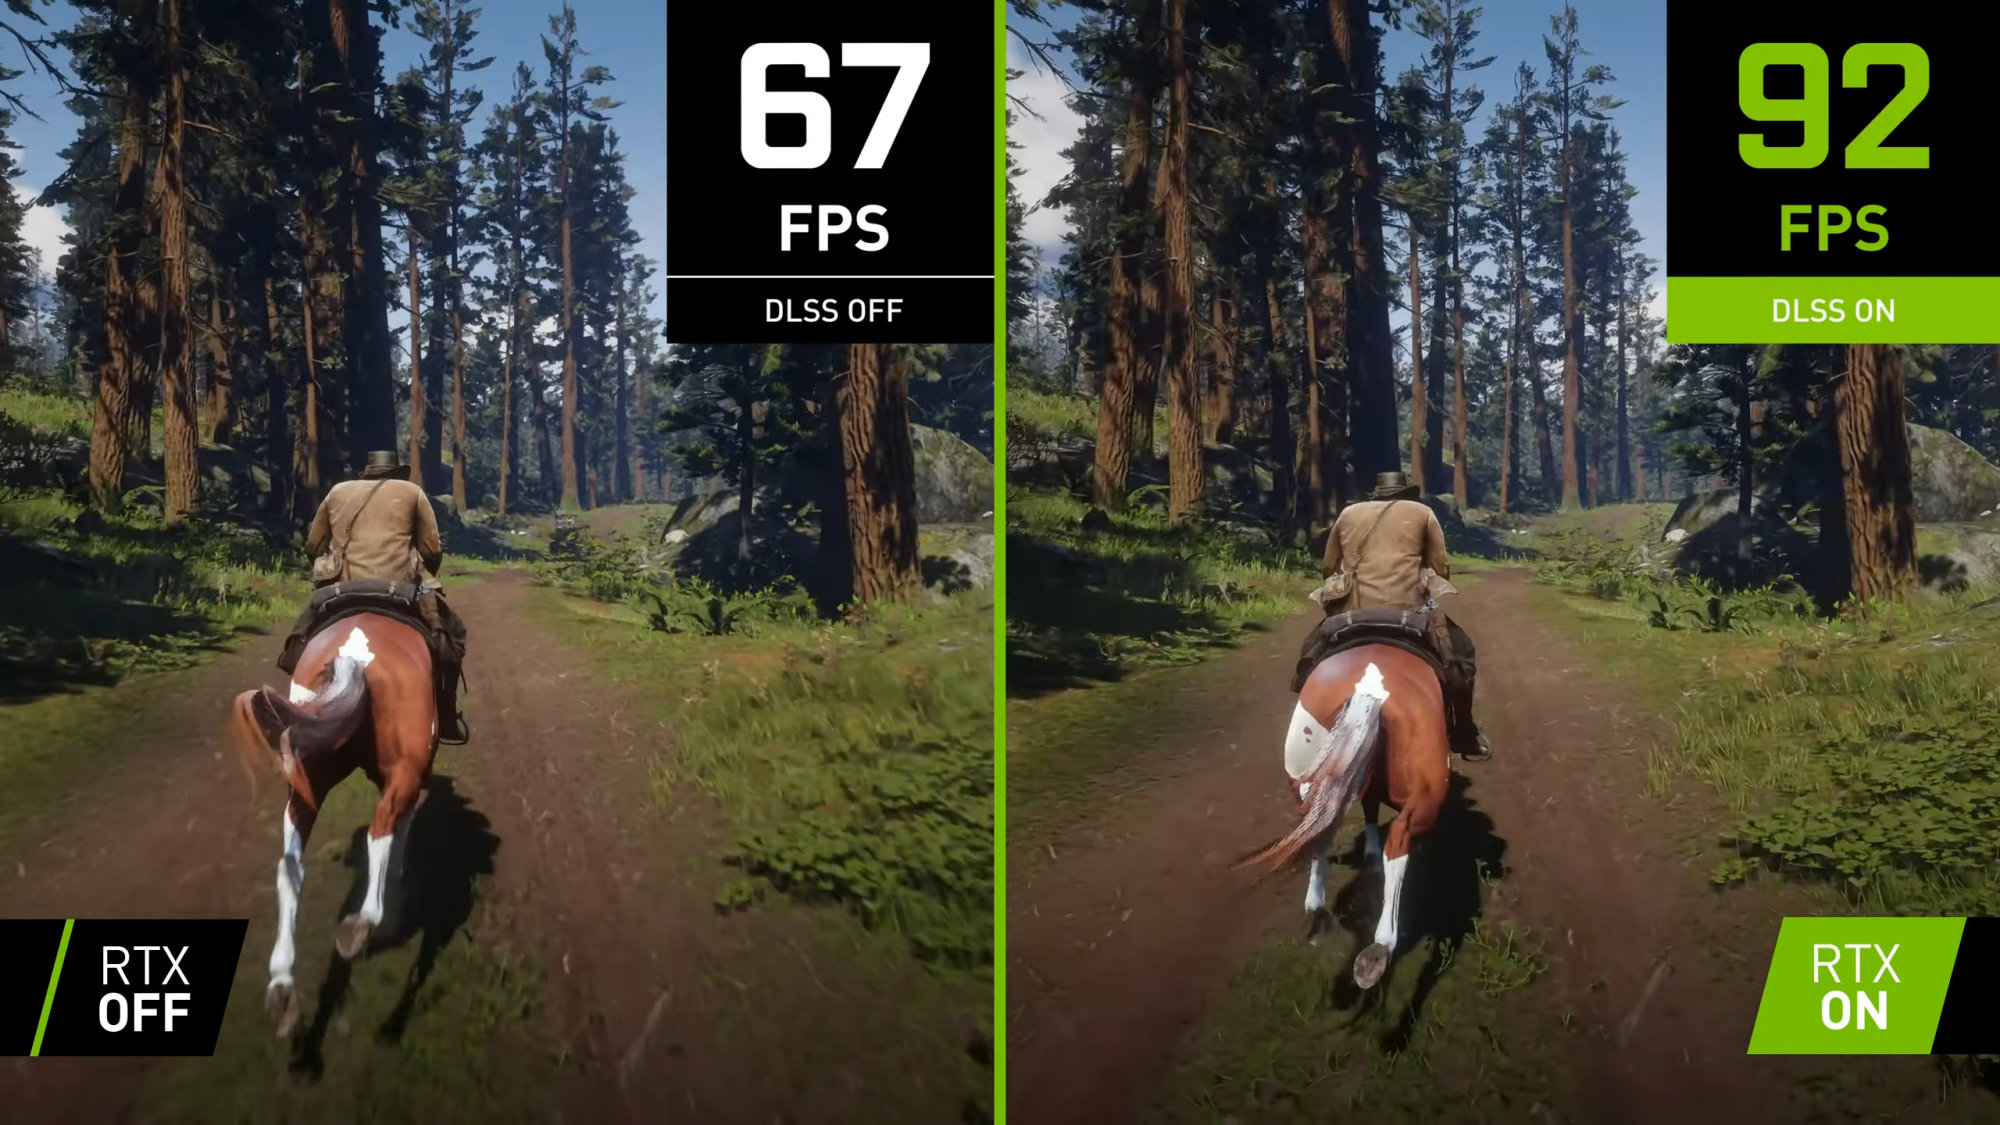 distrikt Kælder motor NVIDIA DLSS is now available in Red Dead Redemption 2 and Red Dead Online,  up to 45% higher performance at 4K - VideoCardz.com